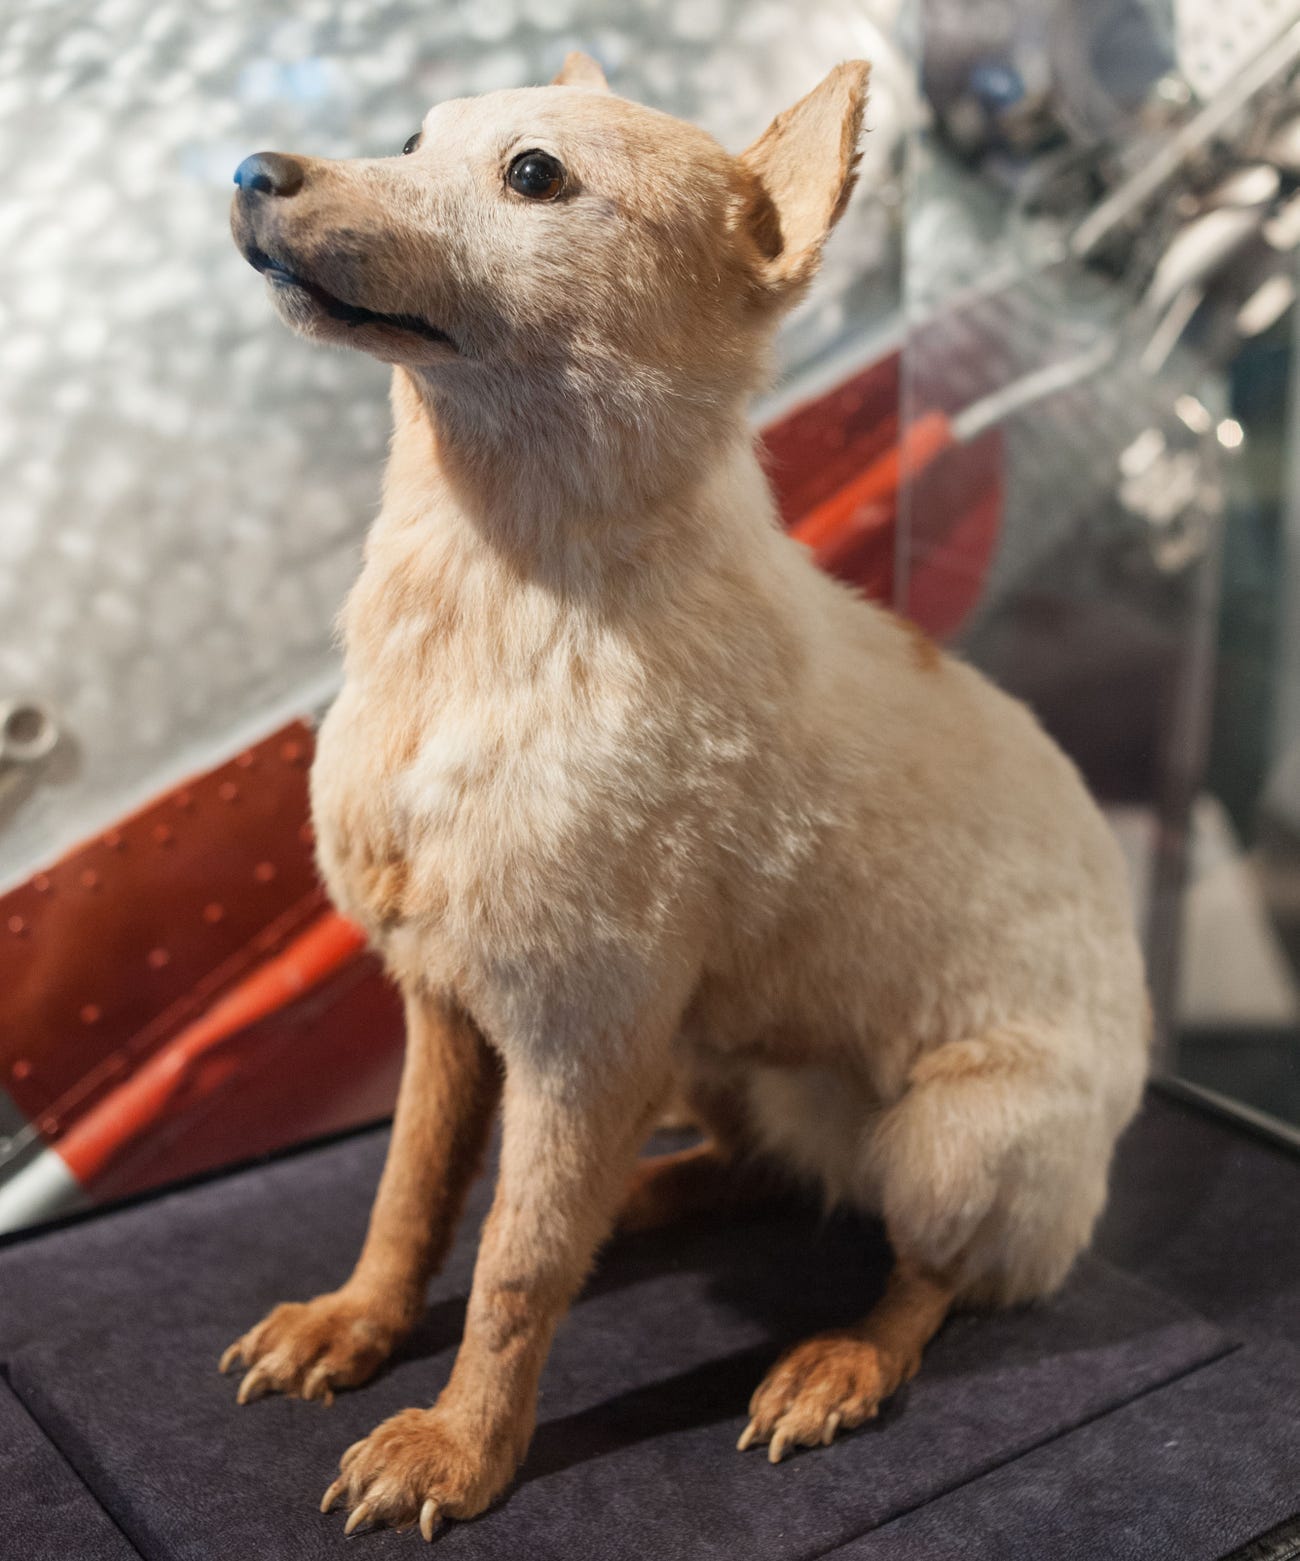 belka space dog moscow museum closeup